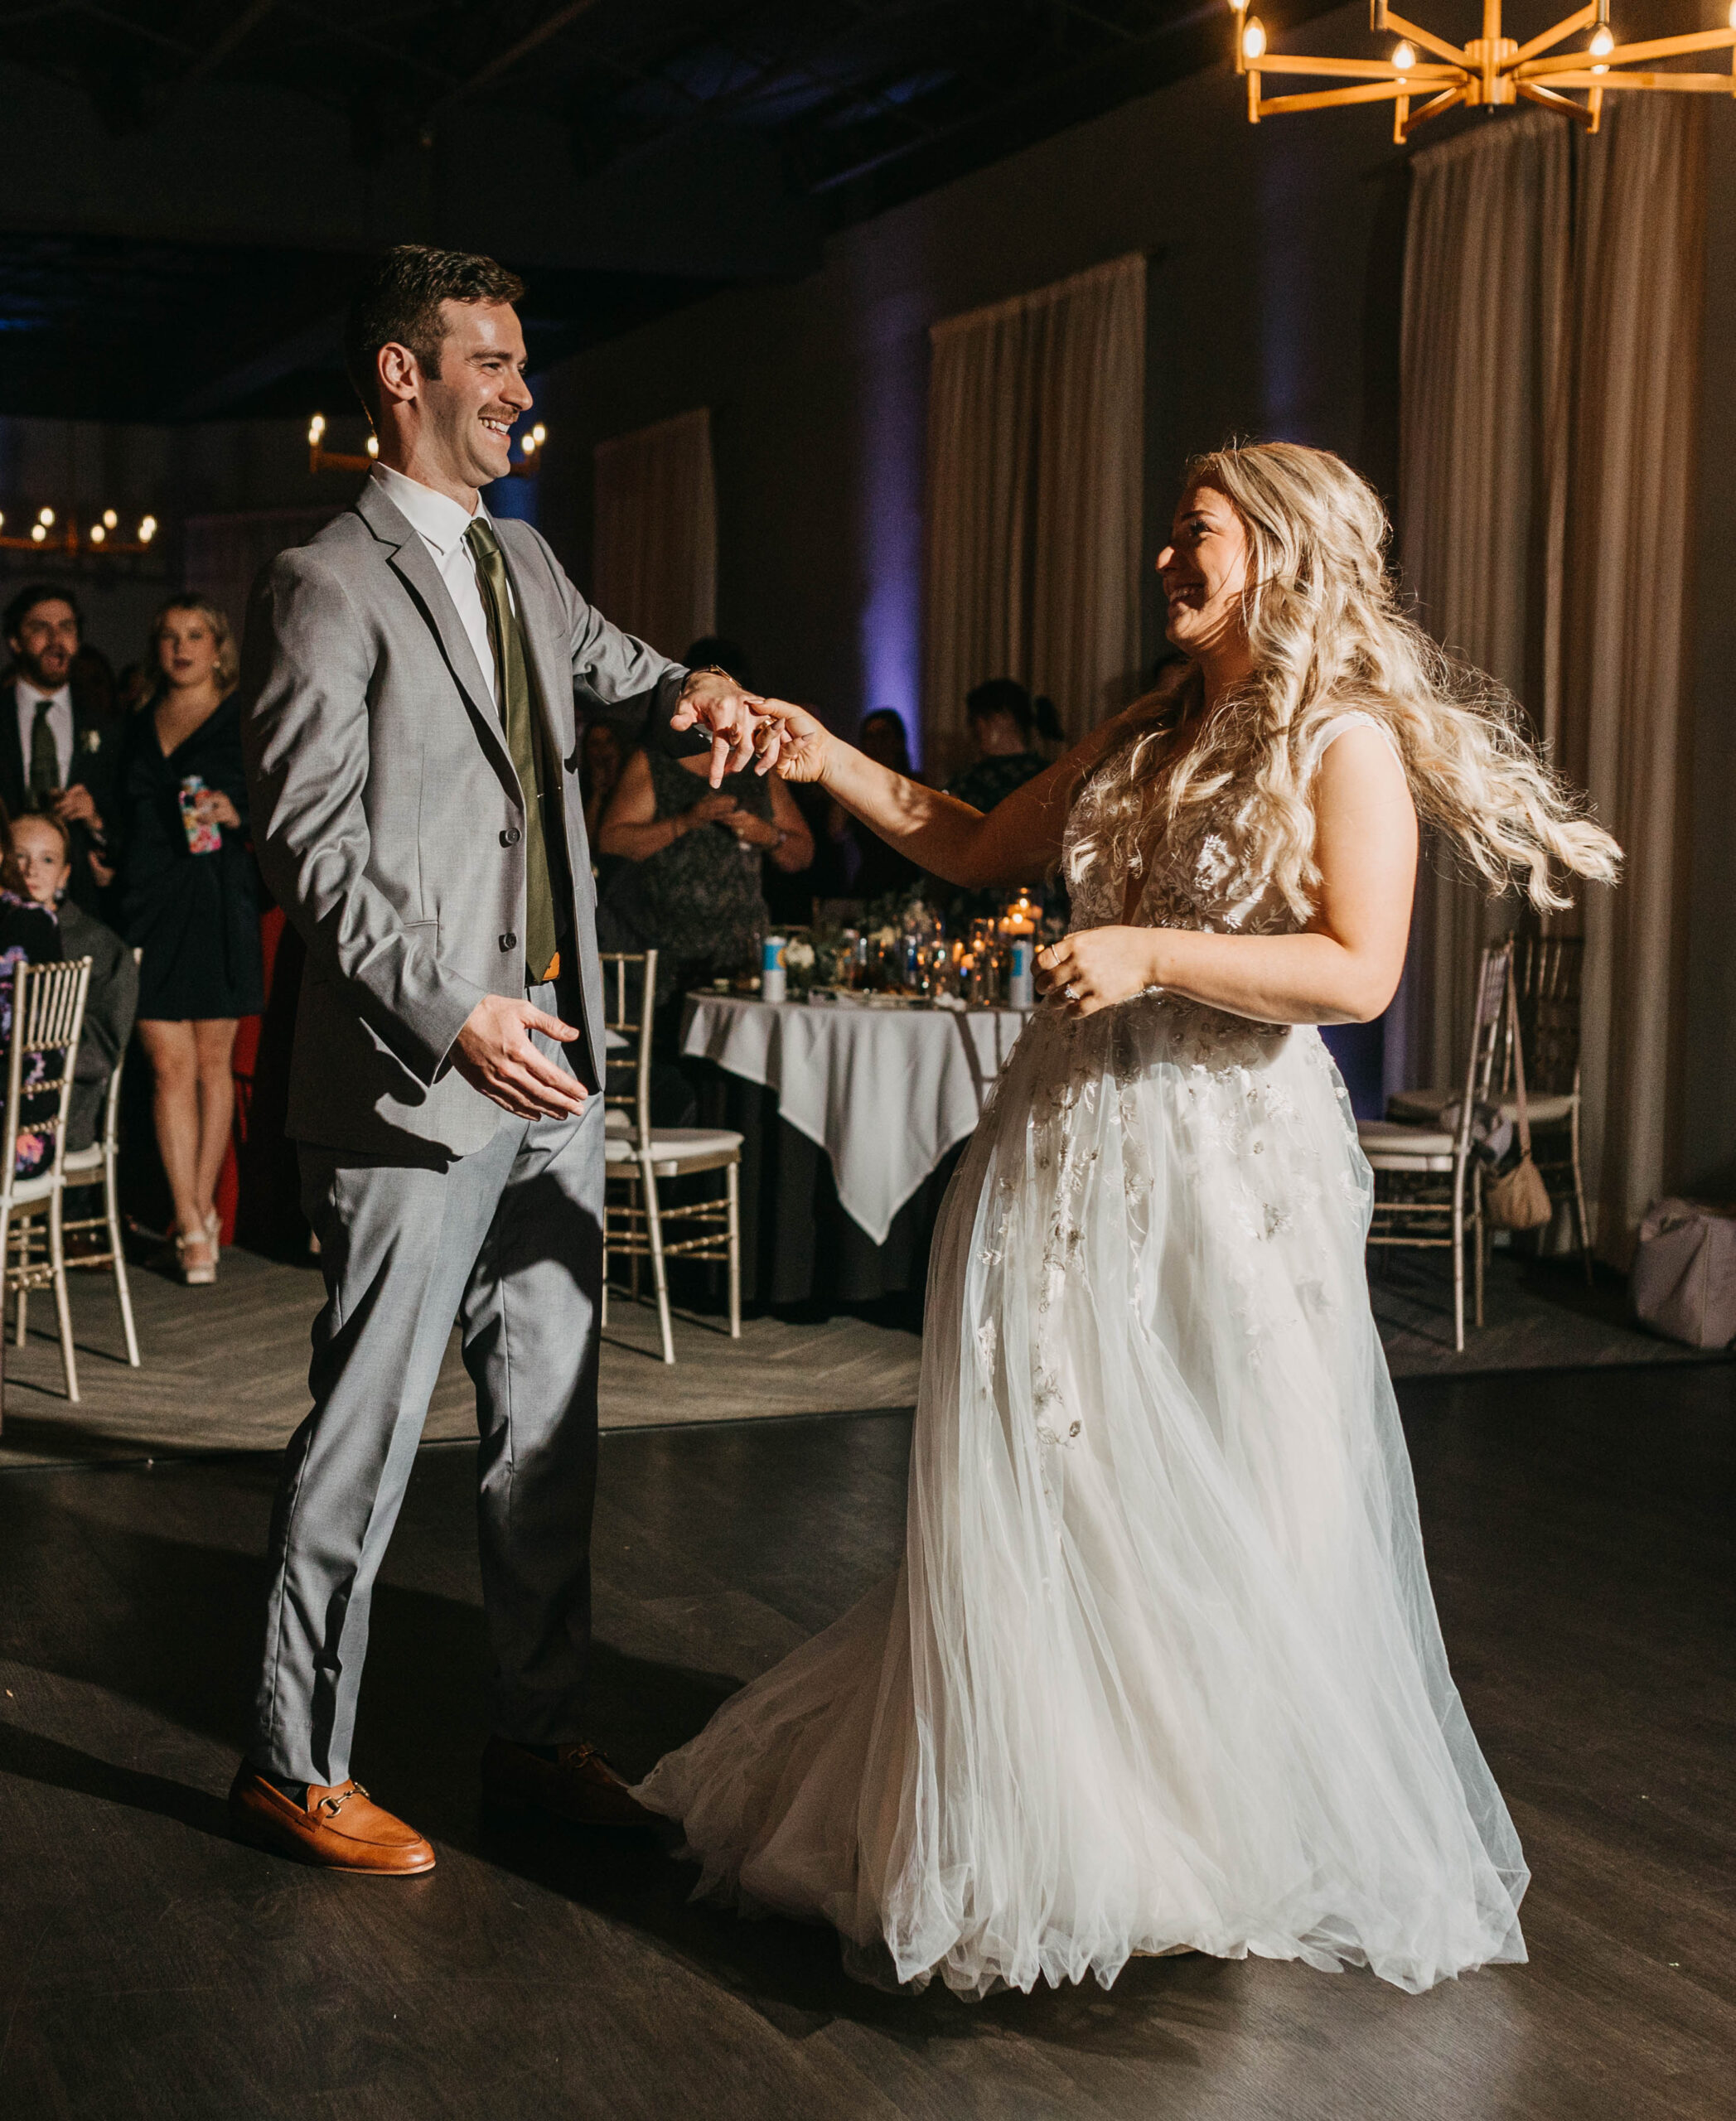 A wedding couple sharing their first dance together at Hotel Covington.